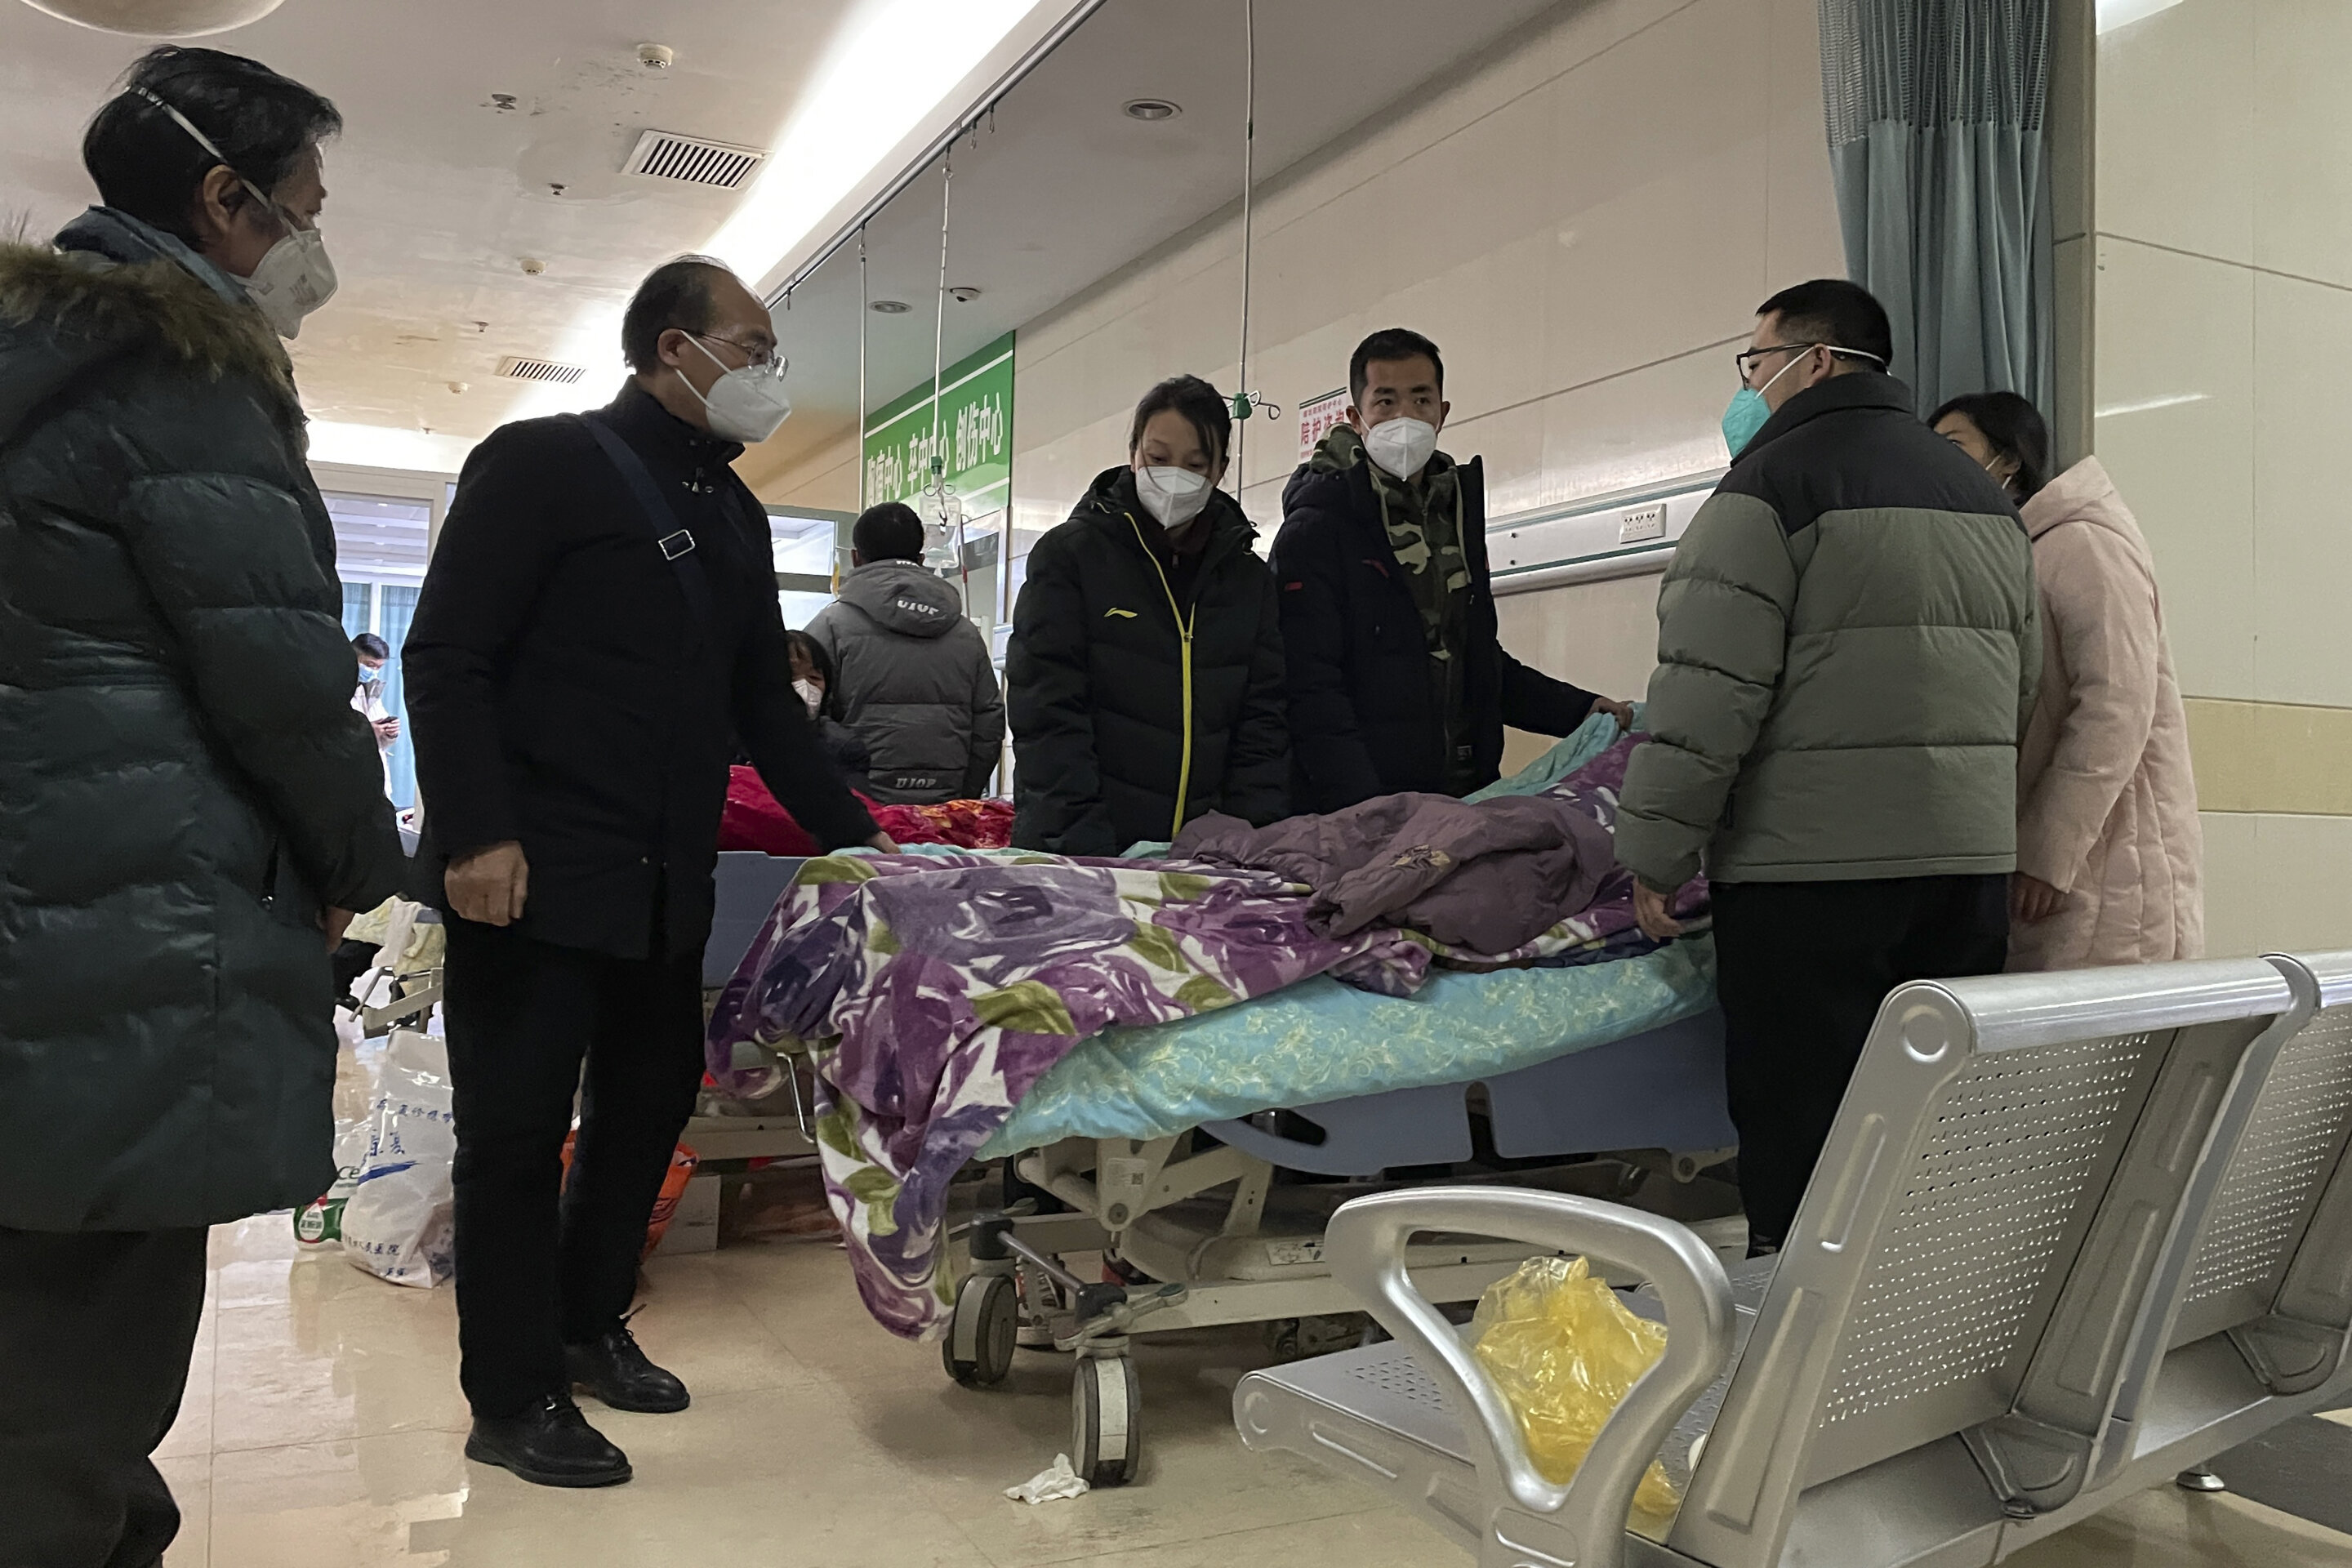 #Packed ICUs, crowded crematoriums: COVID roils Chinese towns